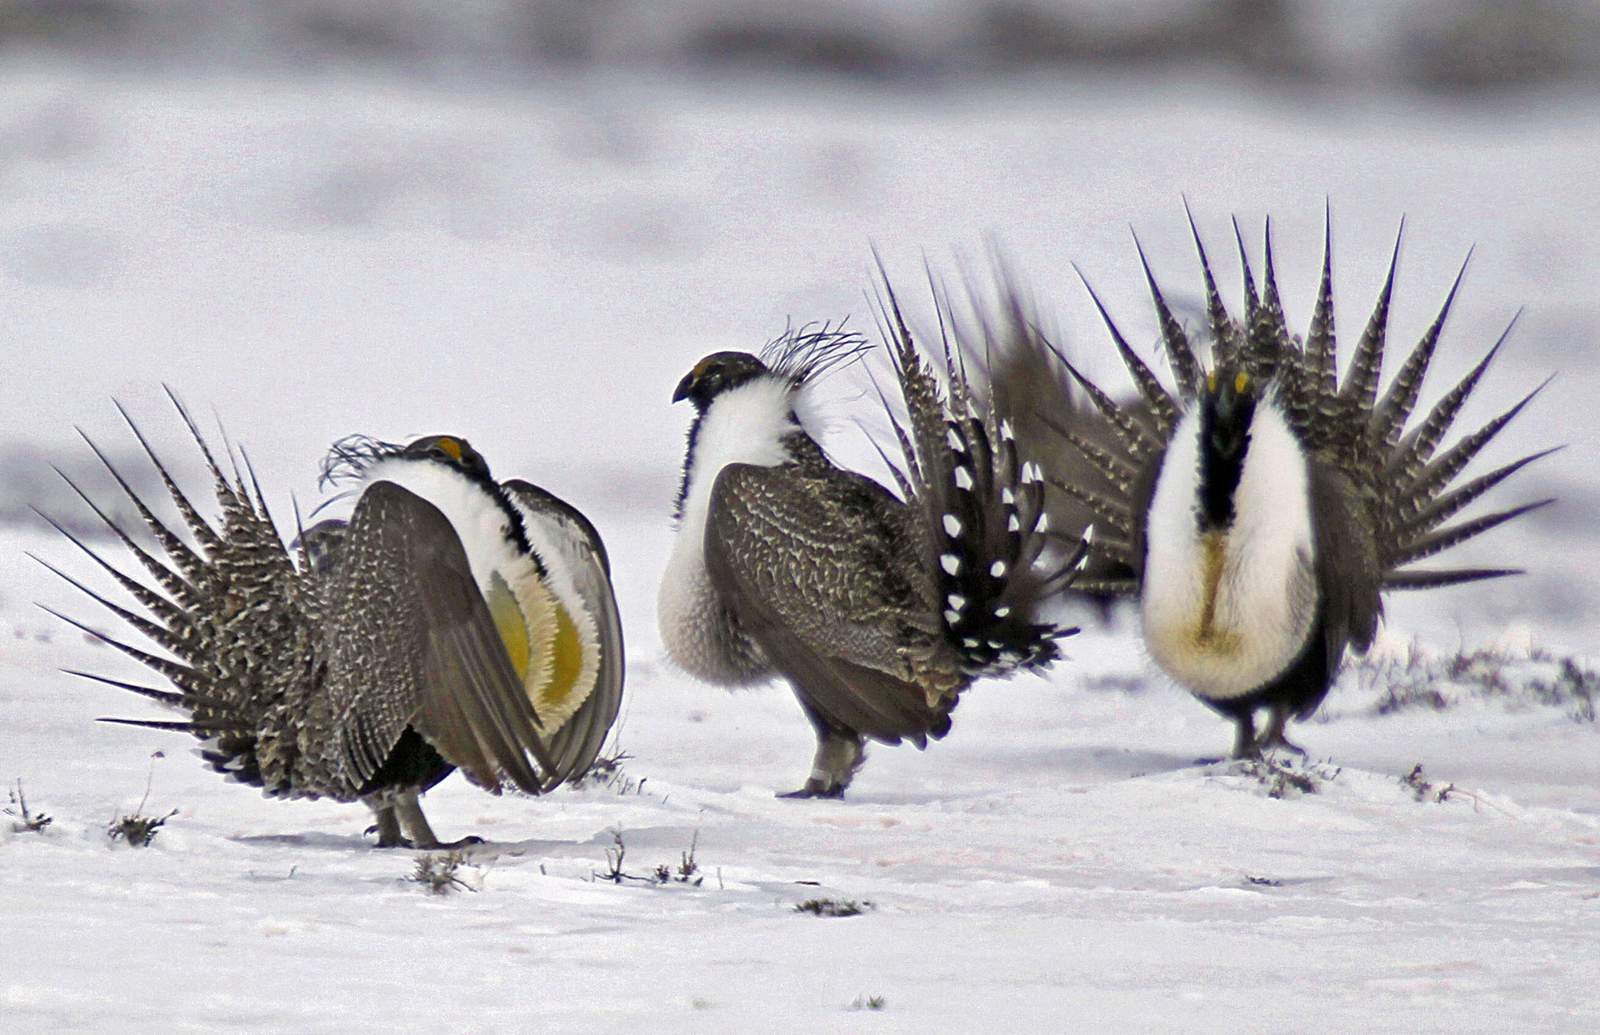 Sage grouse review done, but scant time for Trump's changes